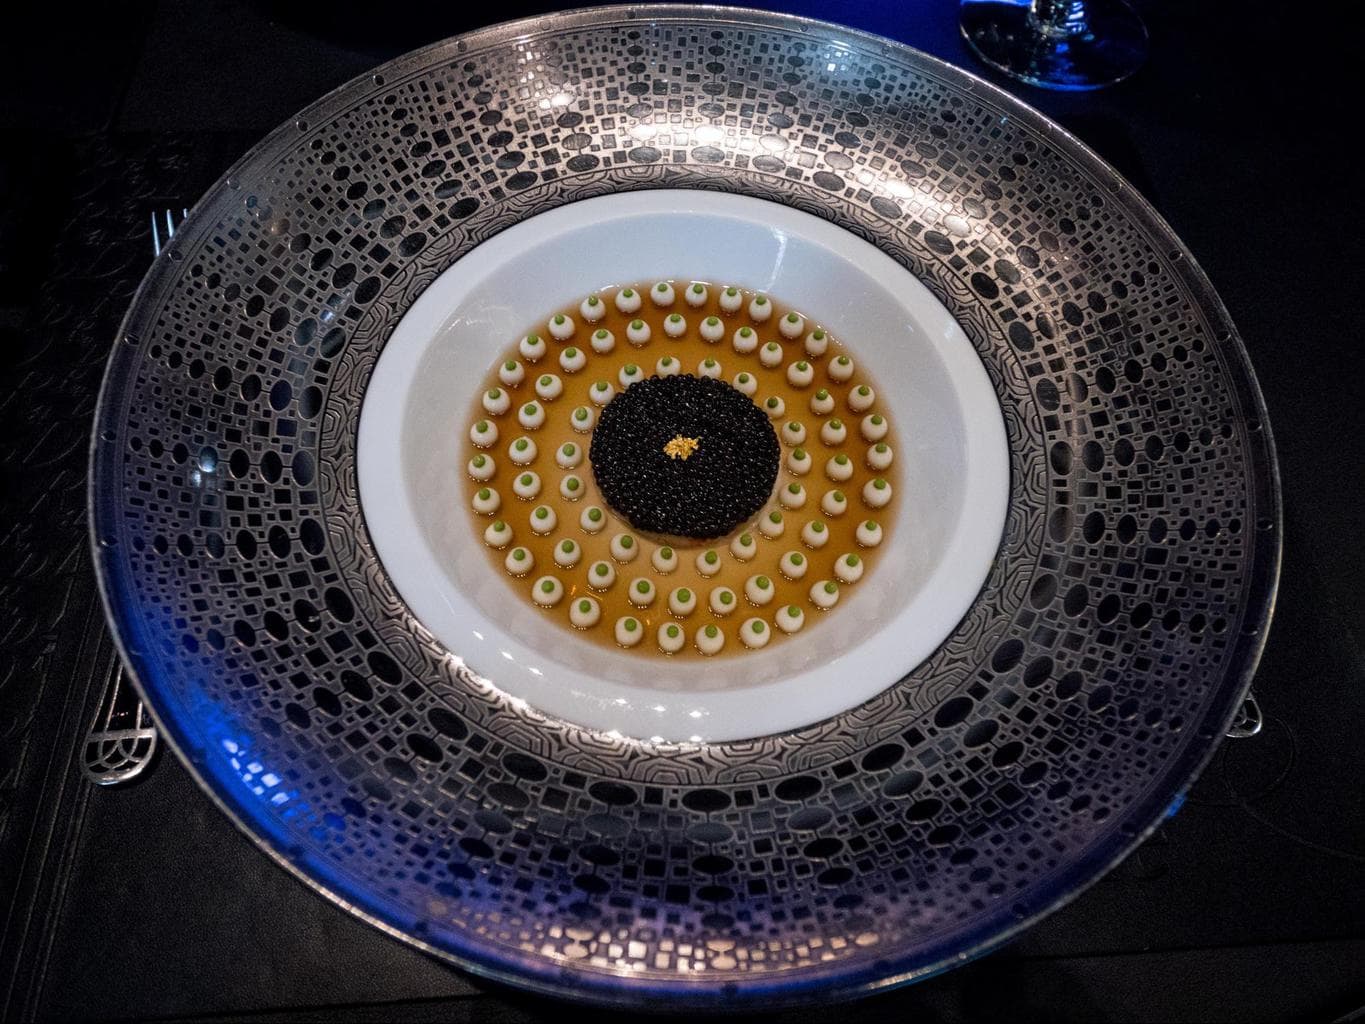 A refined starter of caviar at Robuchon au Dome